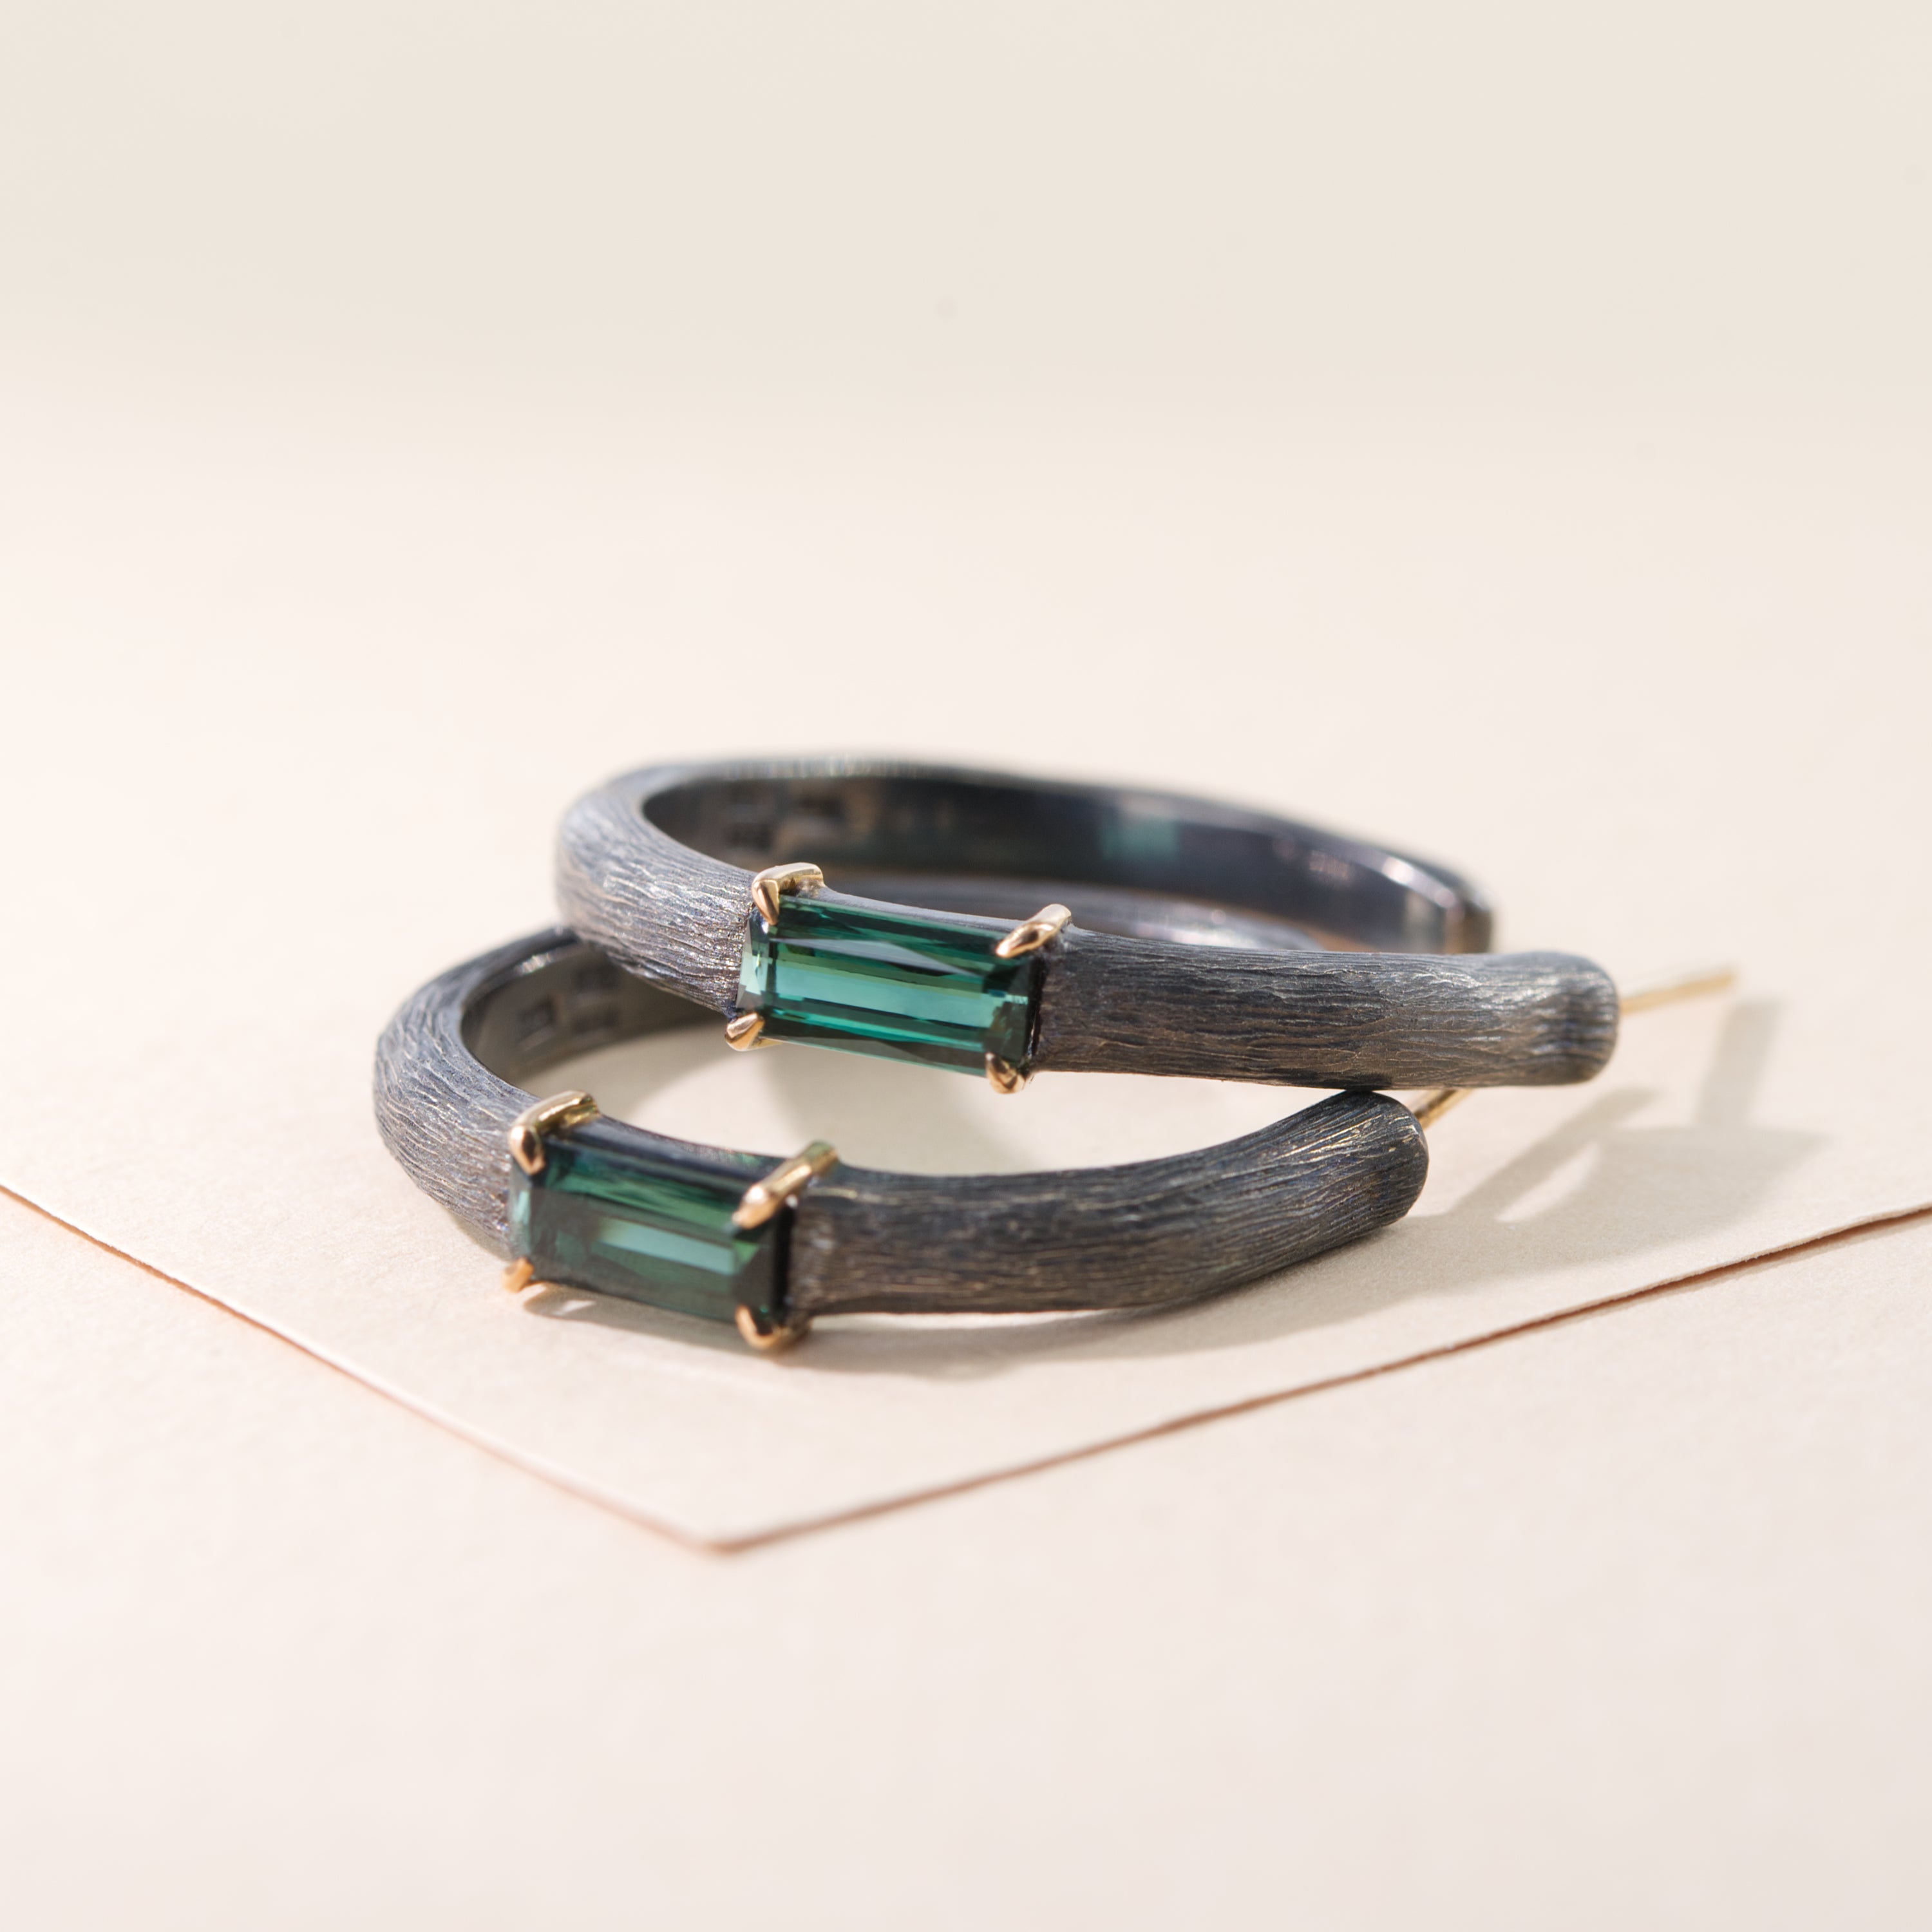 Green Tourmaline Modern Hoop Earrings by Ewa Z. Sleziona, from Botanique Collection